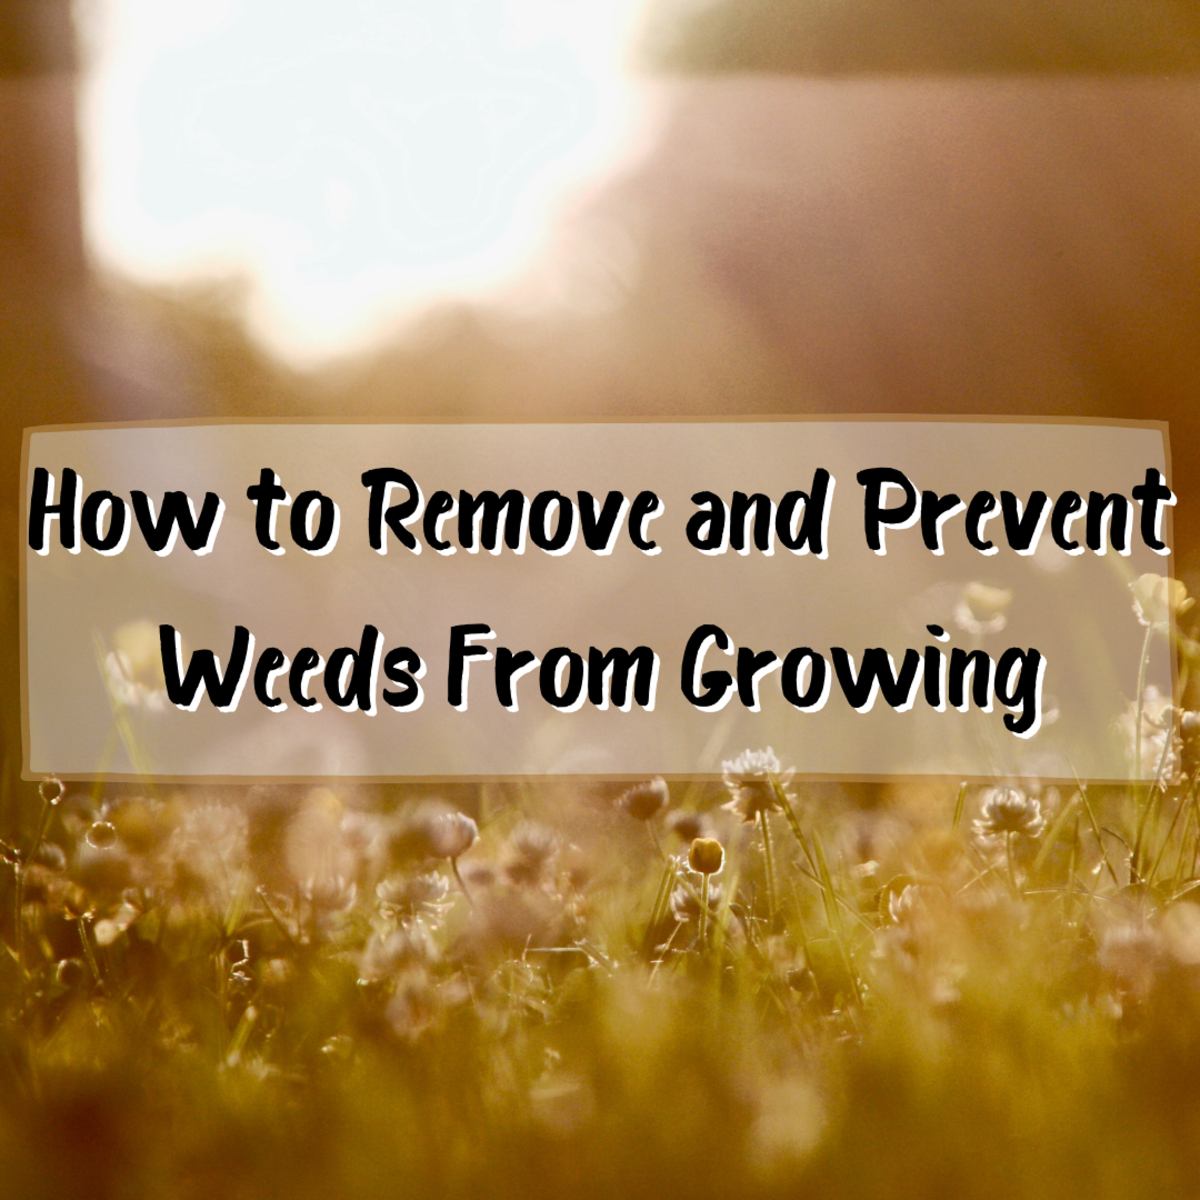 Are you looking at your yard and wondering how to prevent weeds from growing? Look no further! This guide will help you get rid of those pesky weeds and keep them away for good.